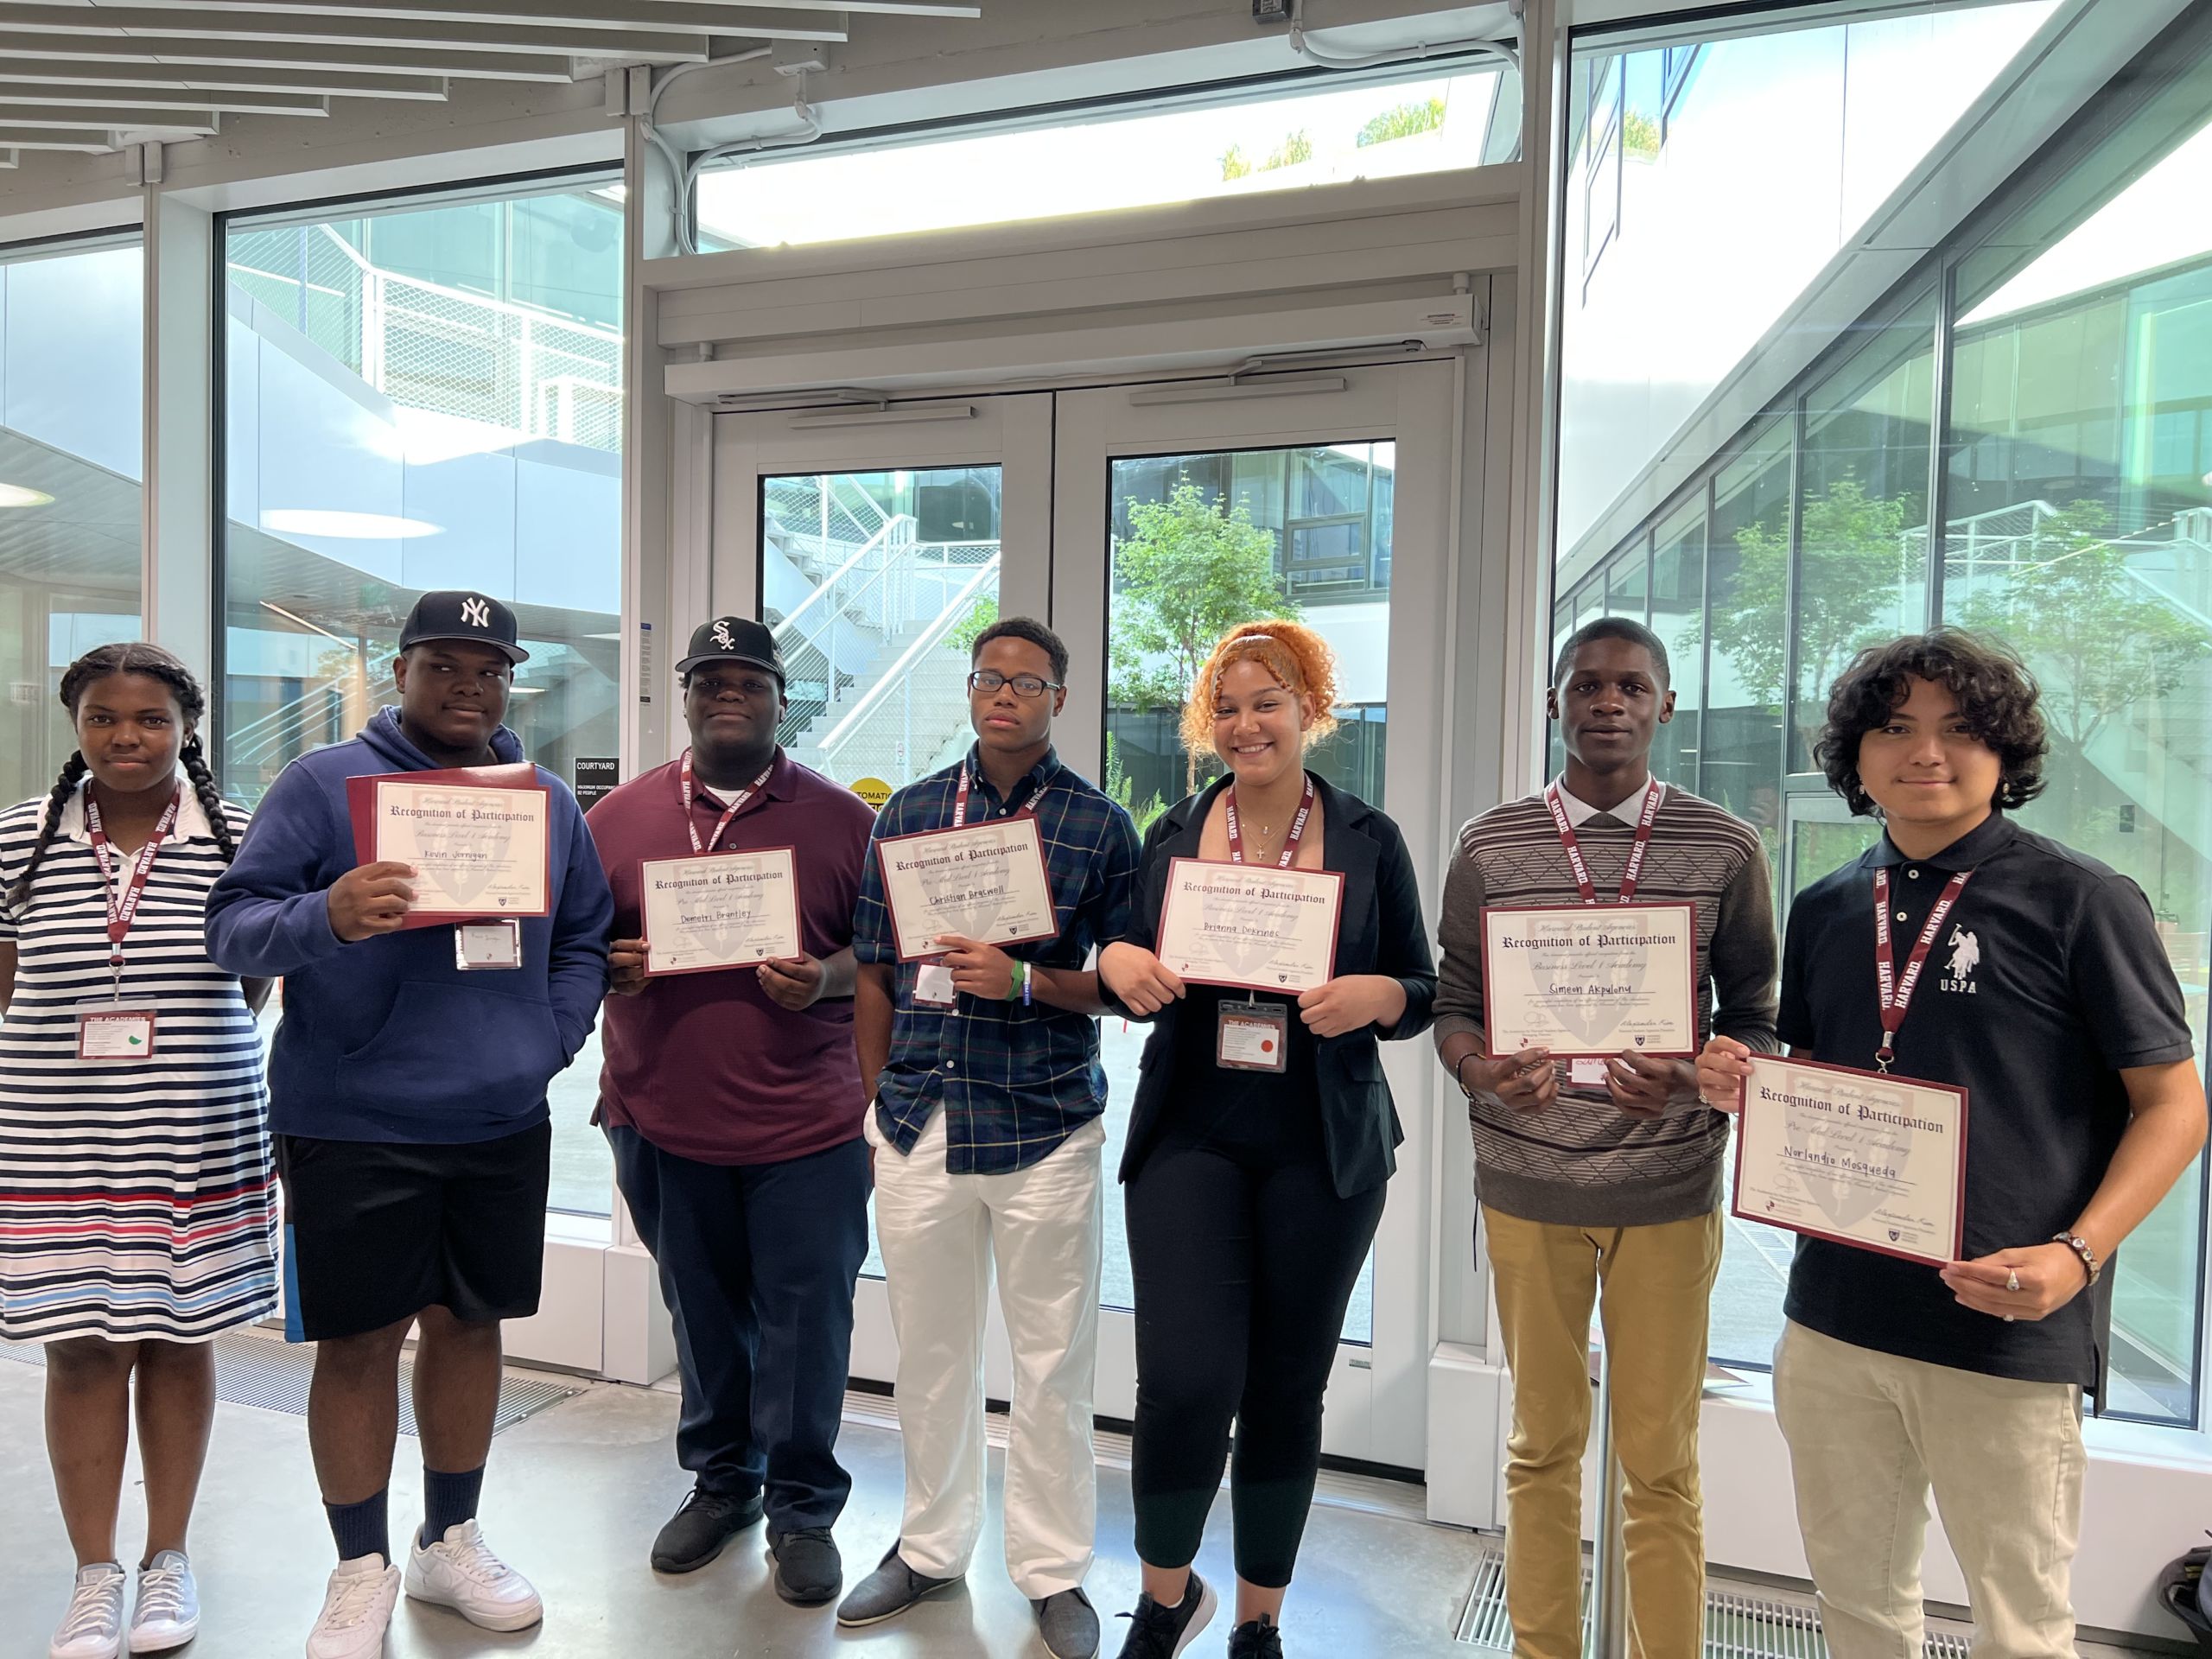 Photo shows 7 Baker College Prep students, posing with their certificates from Harvard University's Harvard Academies program for high school students